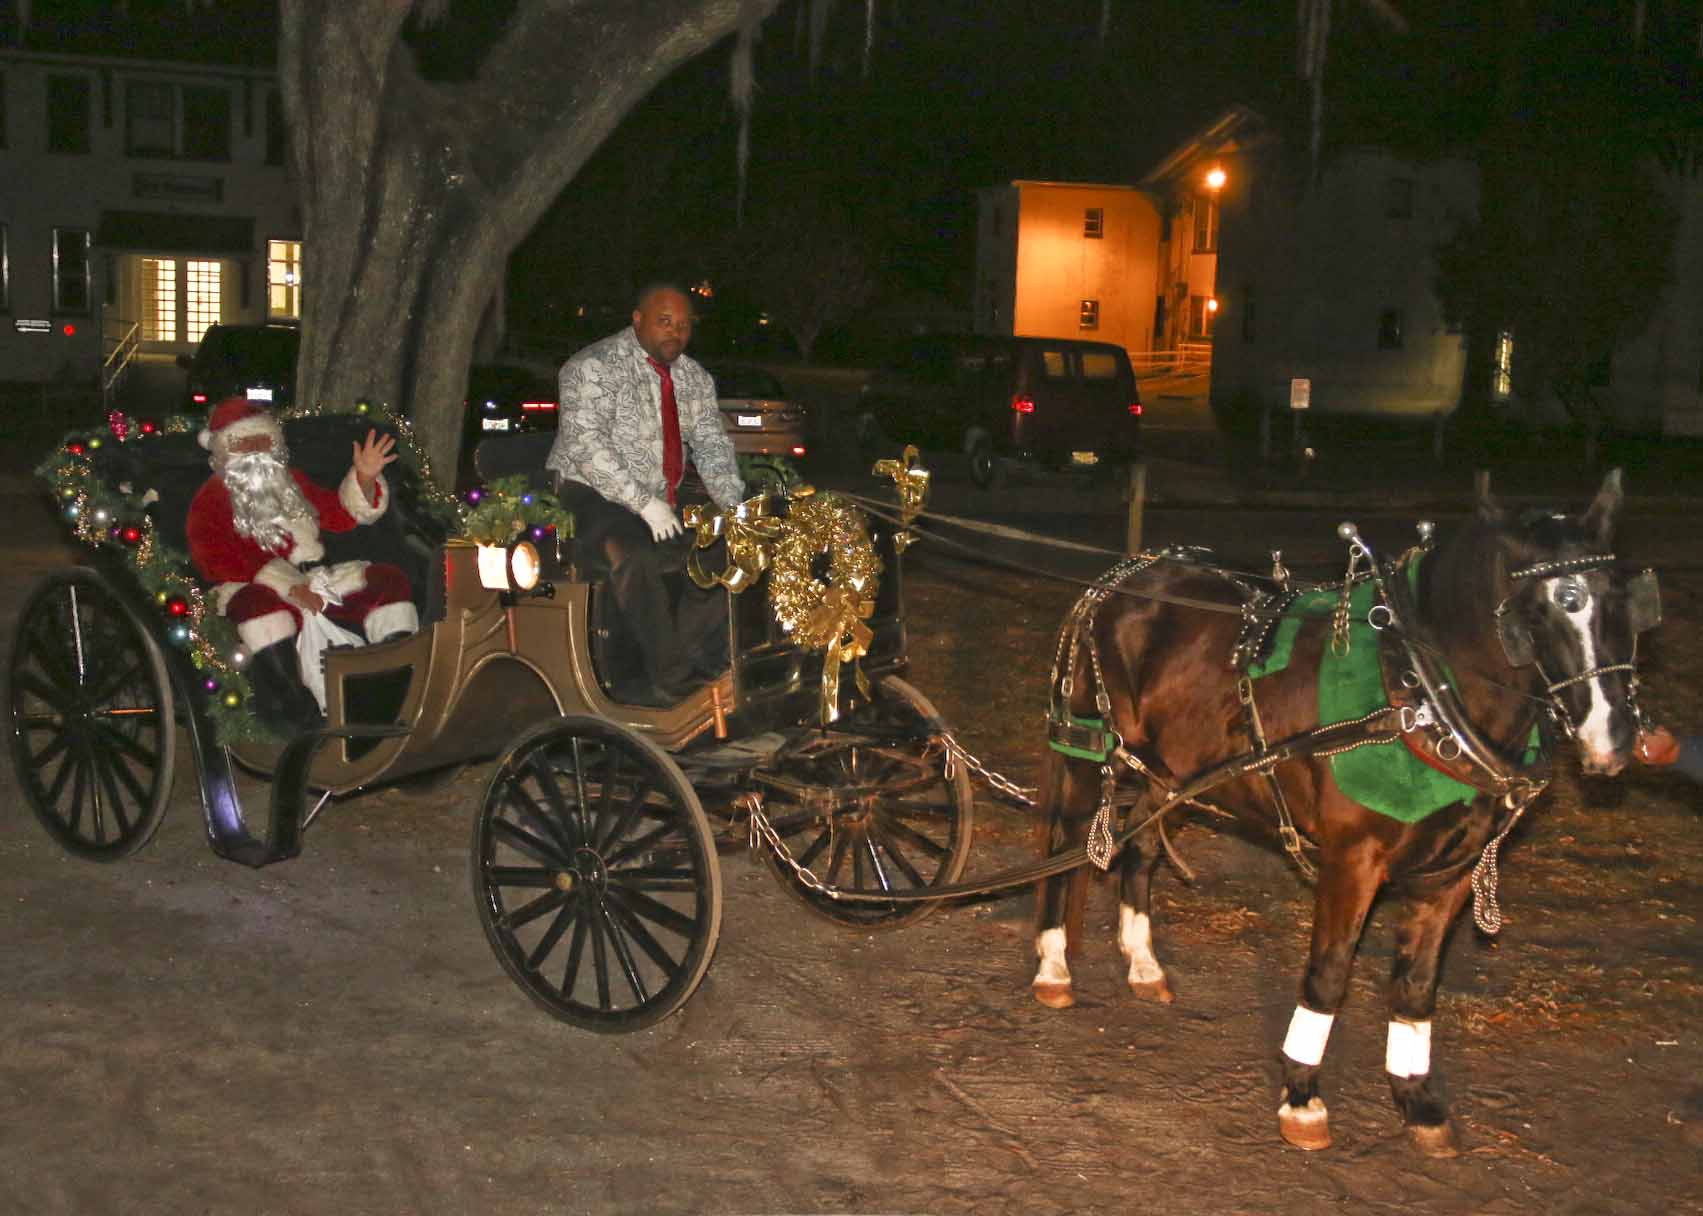 The ceremony concluded with a spectacular lighting of our community Christmas tree and the arrival of Santa Claus via a horse-drawn carriage.
